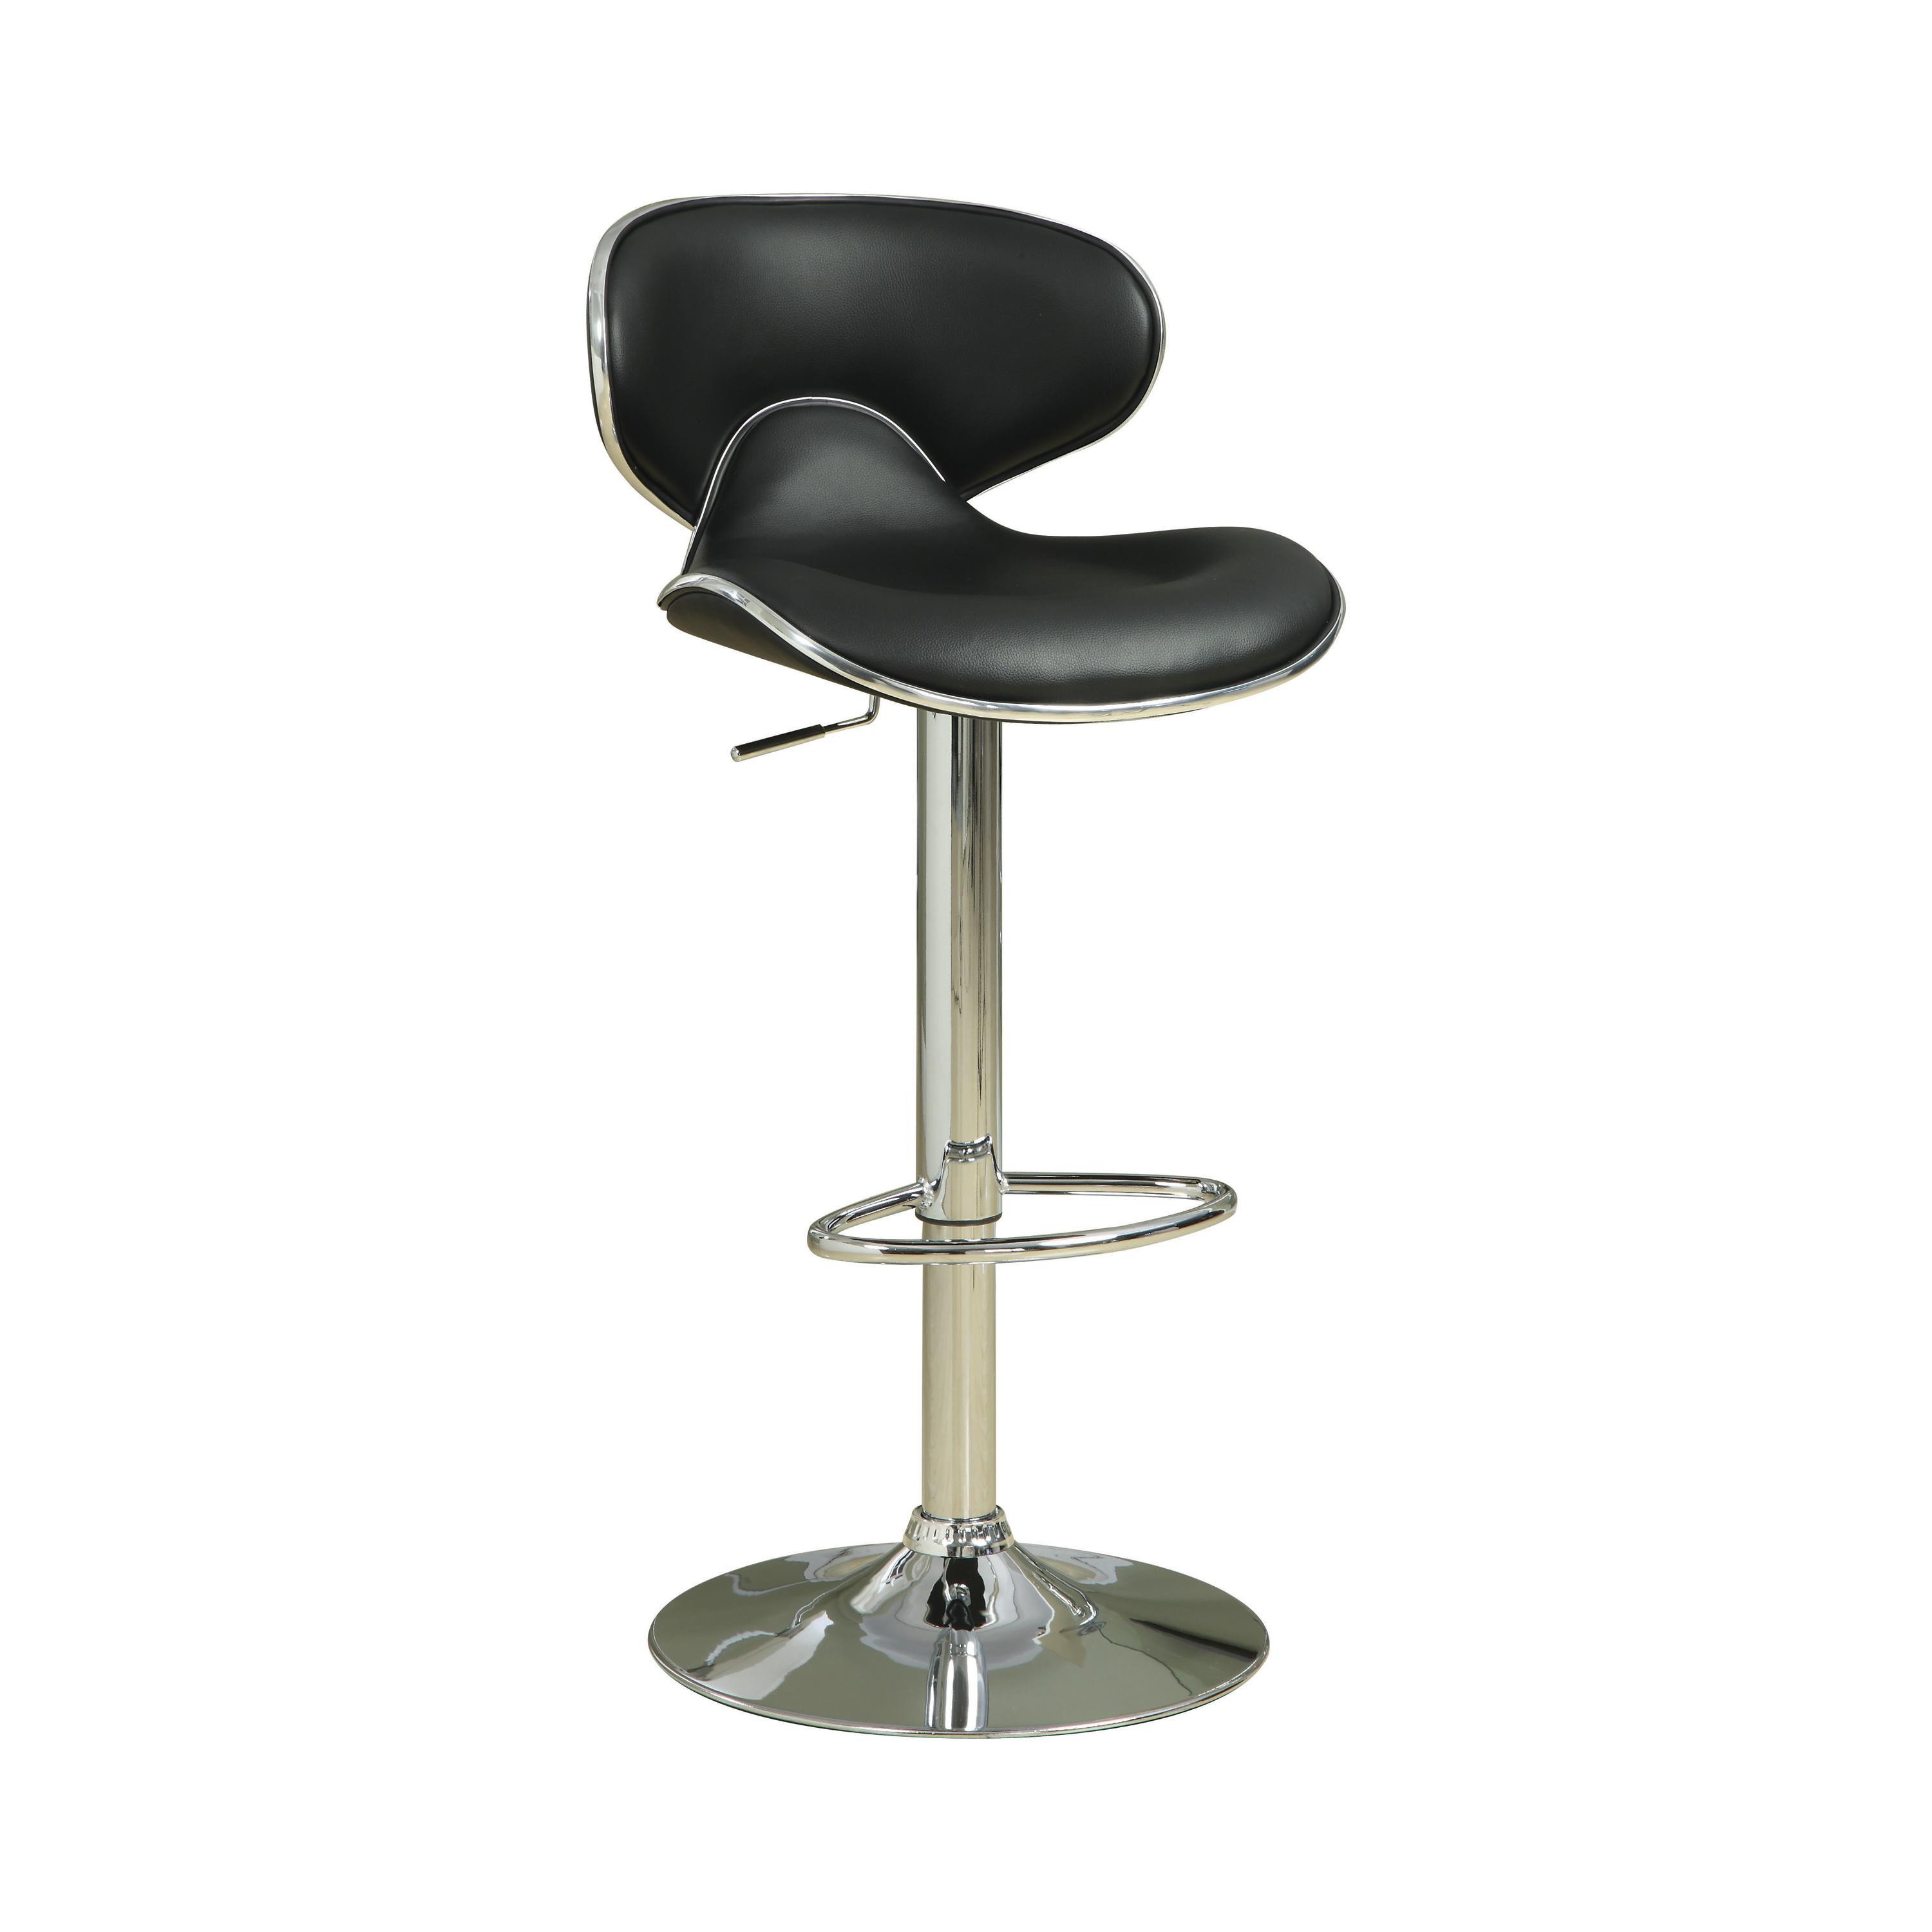 Contemporary Bar Stool Set 120359 120359 in Black Leatherette